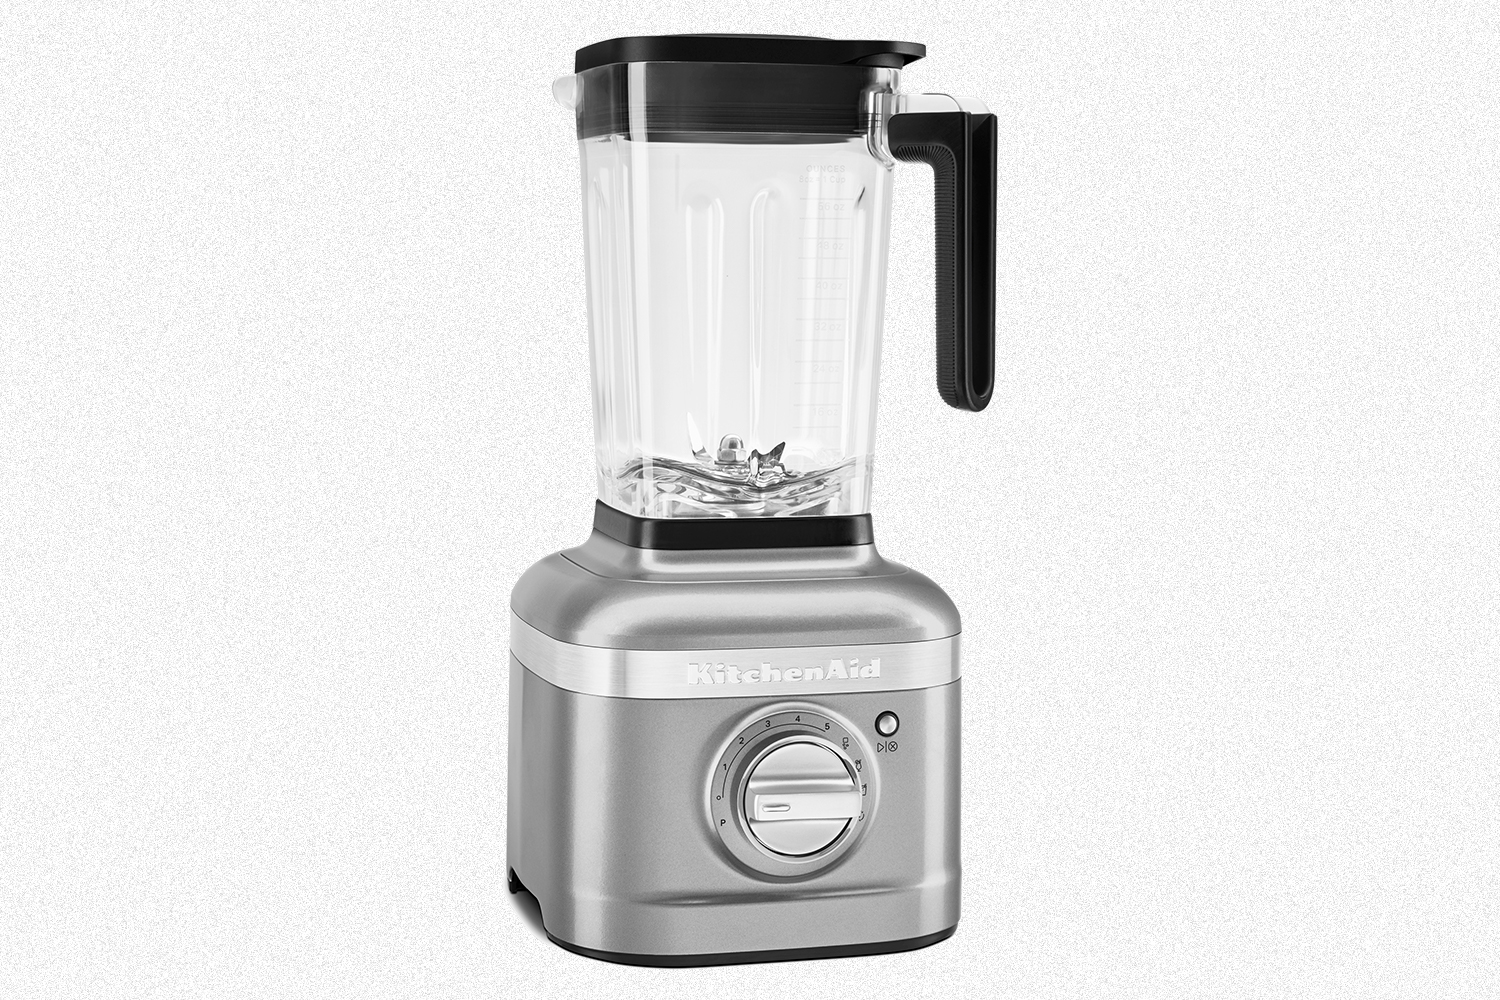 The KitchenAid K400 Variable Speed Blender in silver on a grey background